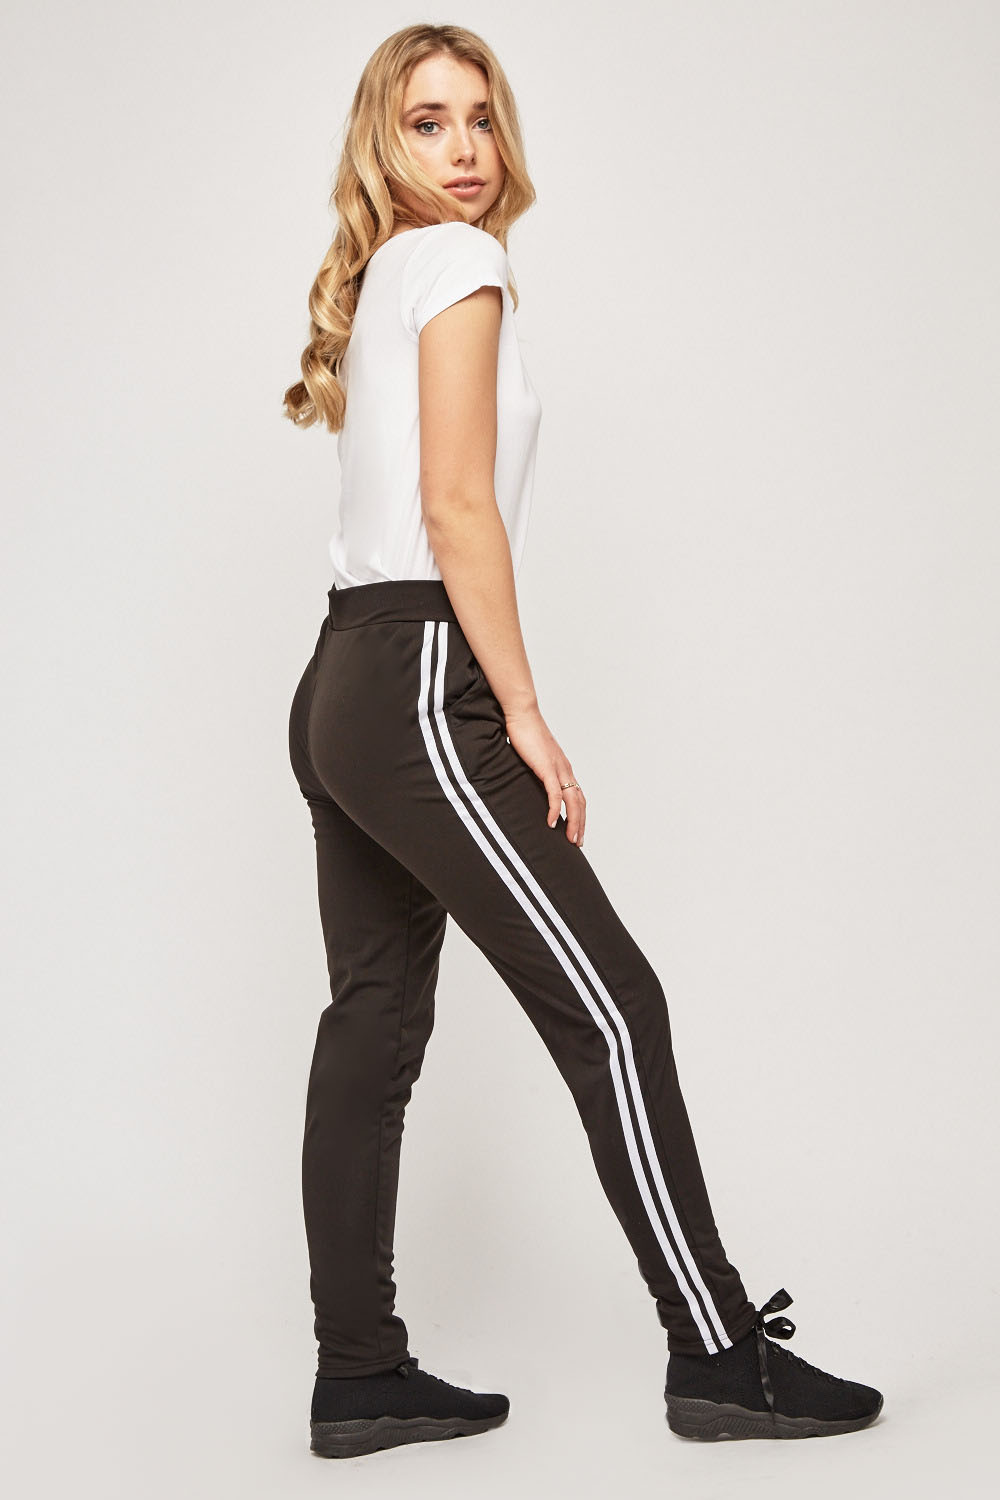 Stripe Side Jogger Style Pants Just 7 | Free Hot Nude Porn Pic Gallery